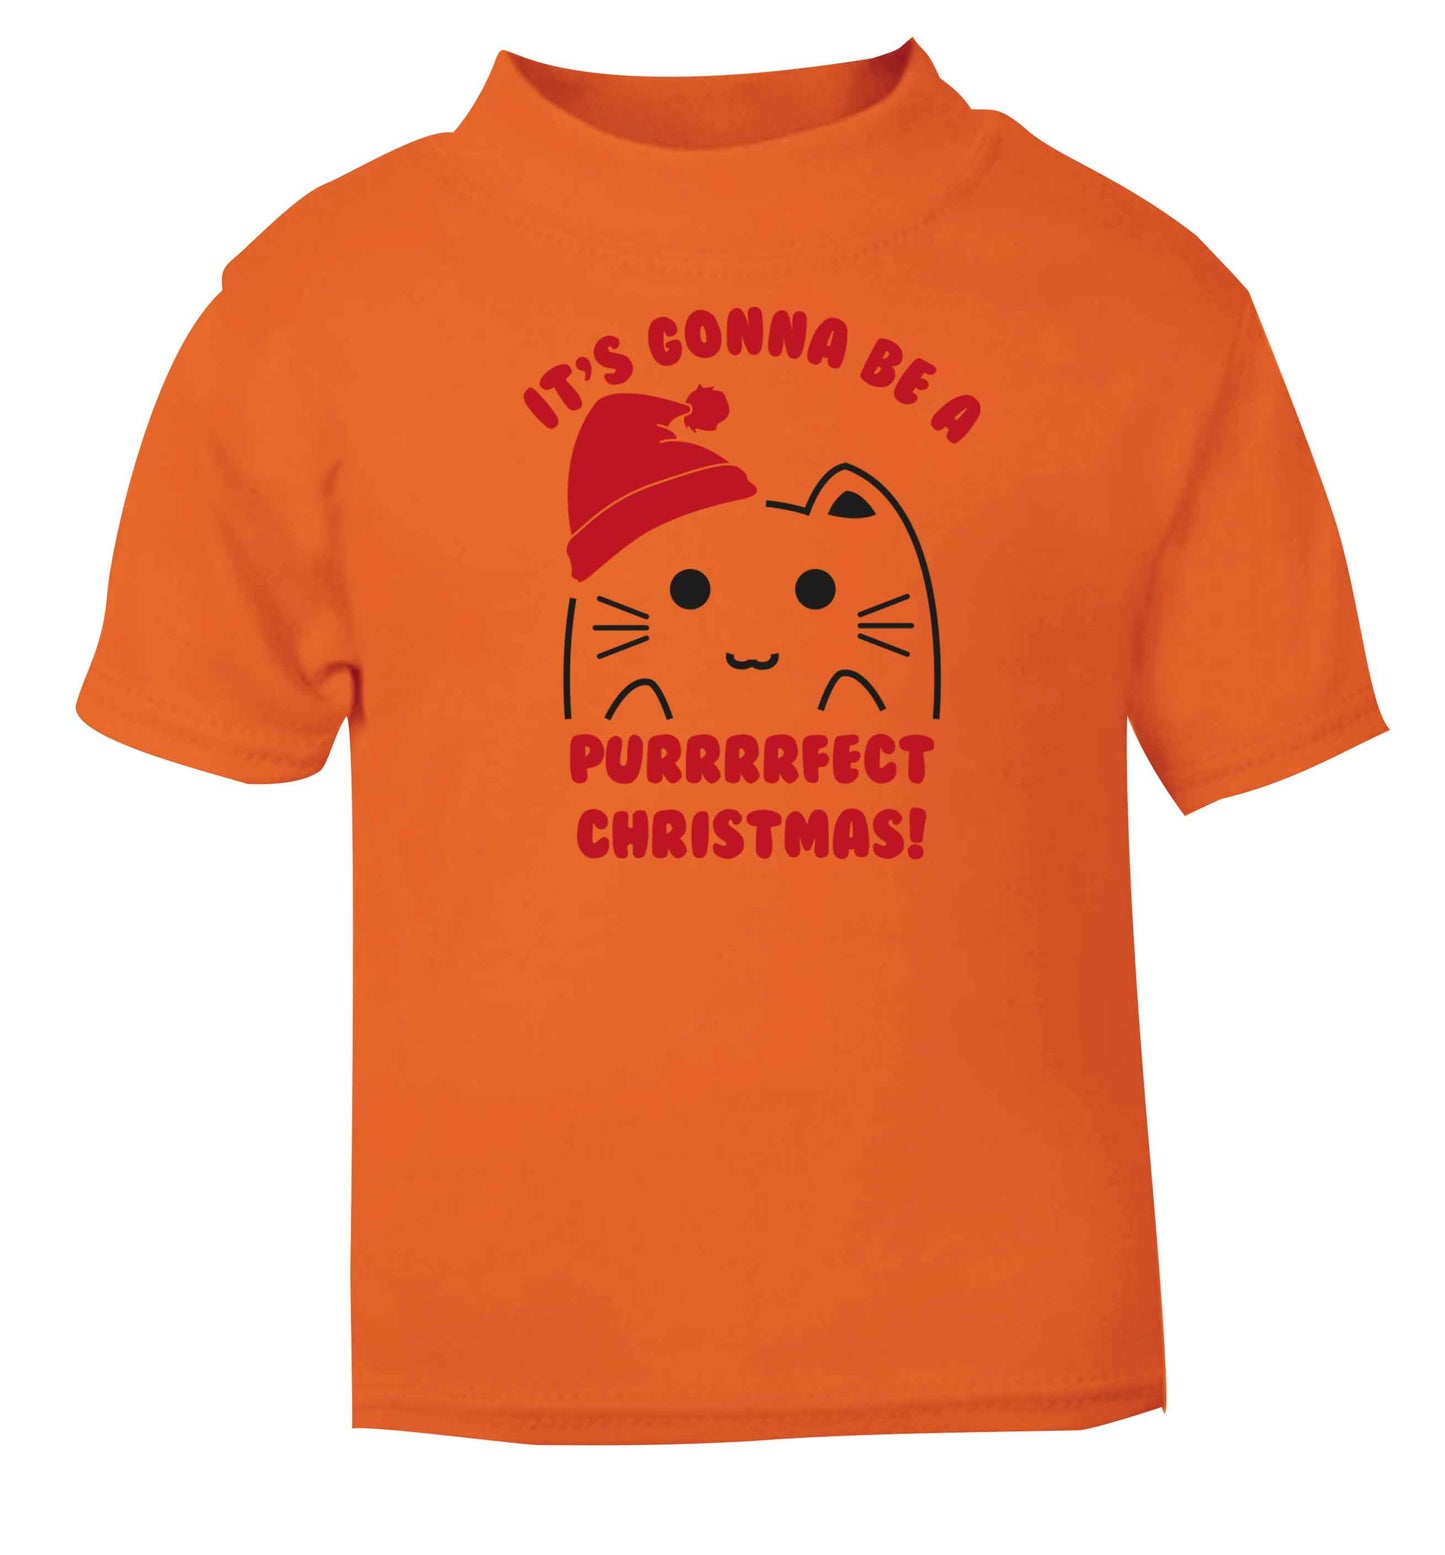 It's going to be a purrfect Christmas orange baby toddler Tshirt 2 Years